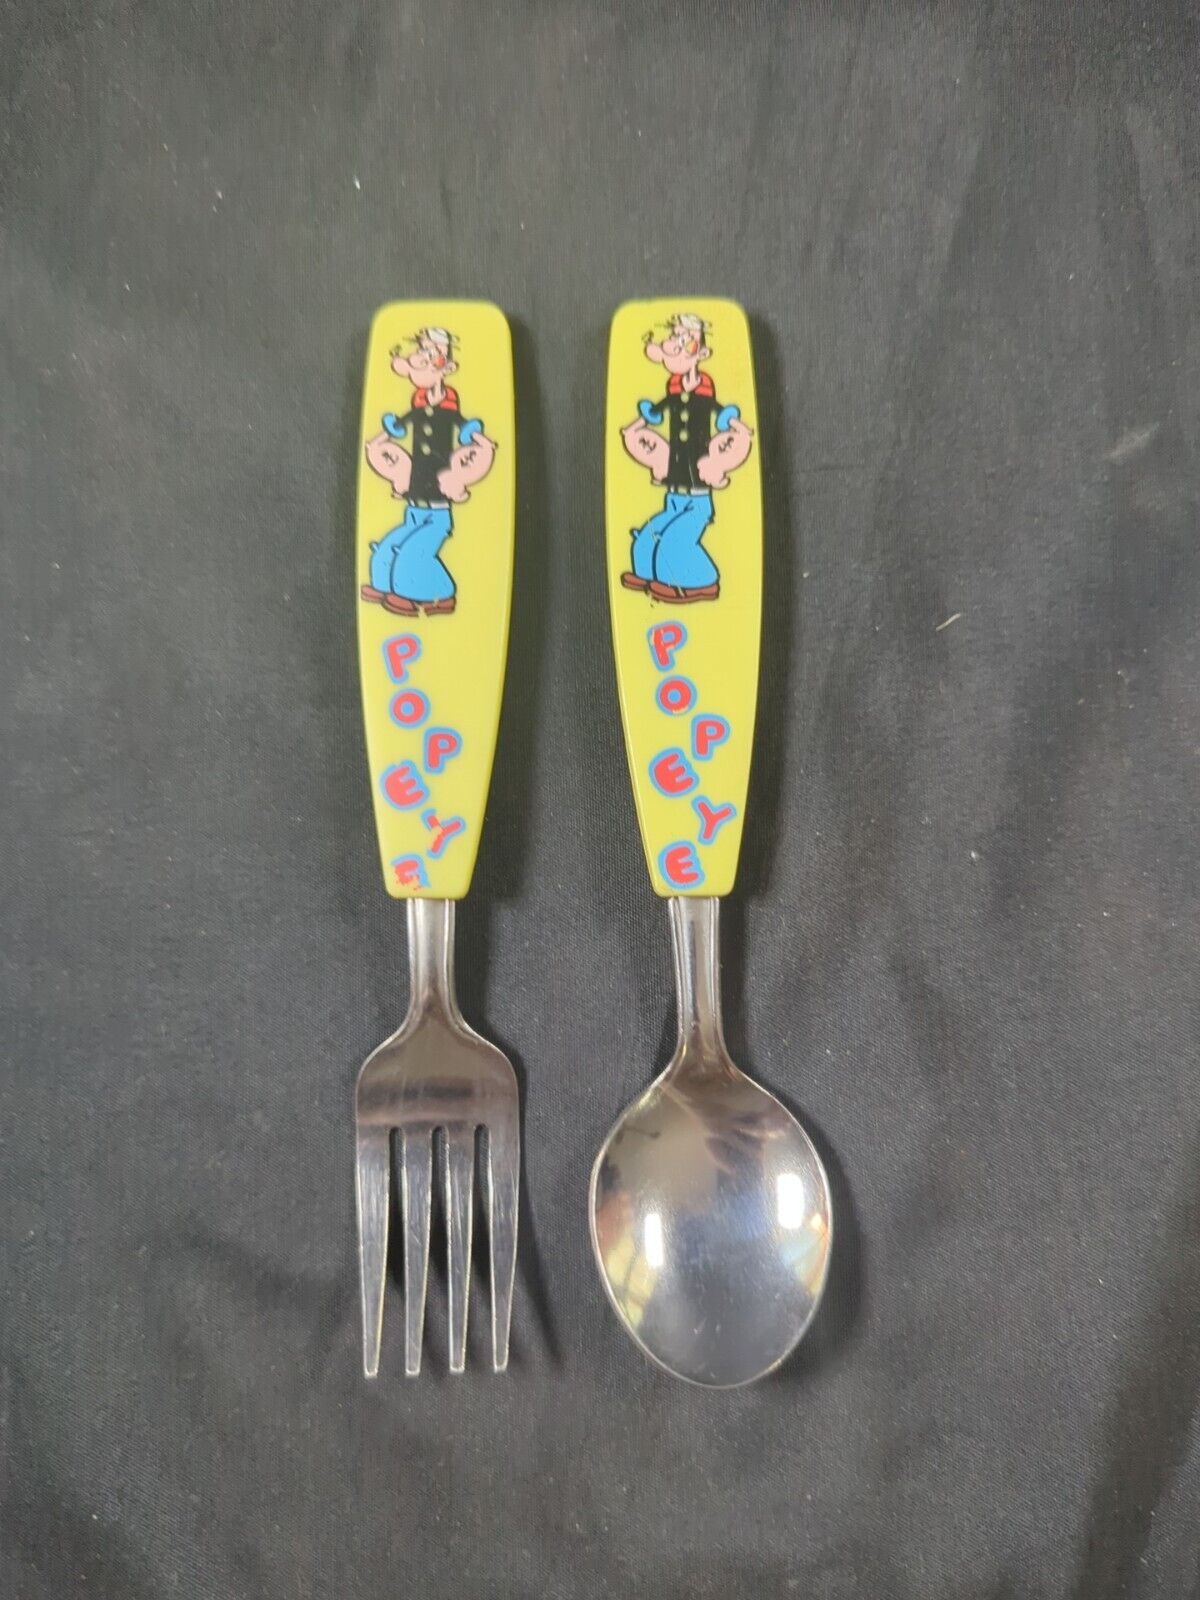 Vintage POPEYE FORK & SPOON SET Childrens Flatware King Feature Unique Stainless